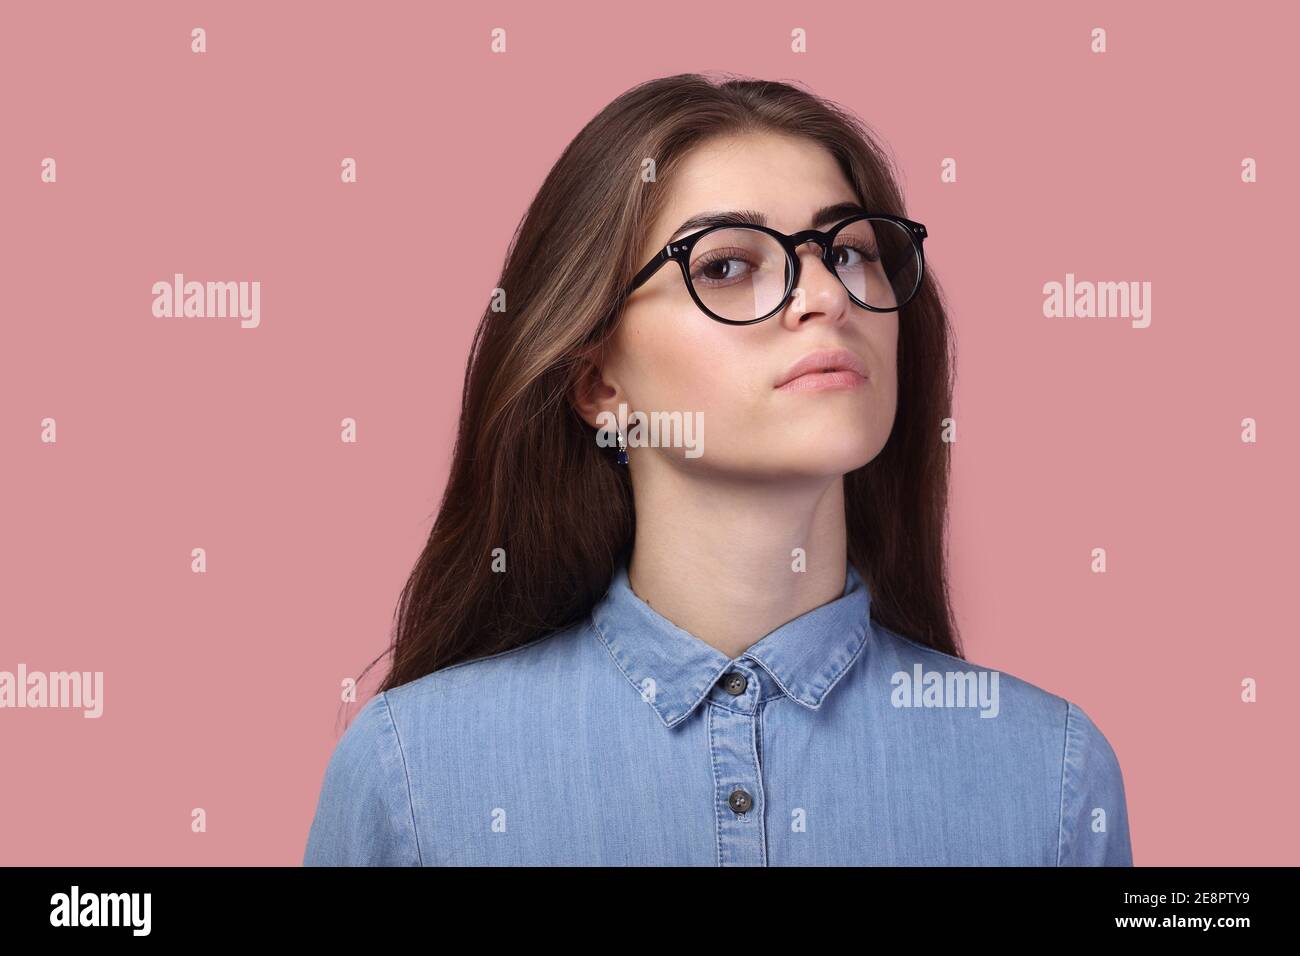 Attractive pensive woman with long hair in glasses and looking at camera, has pleasant appearance, isolated over pink background. Stock Photo